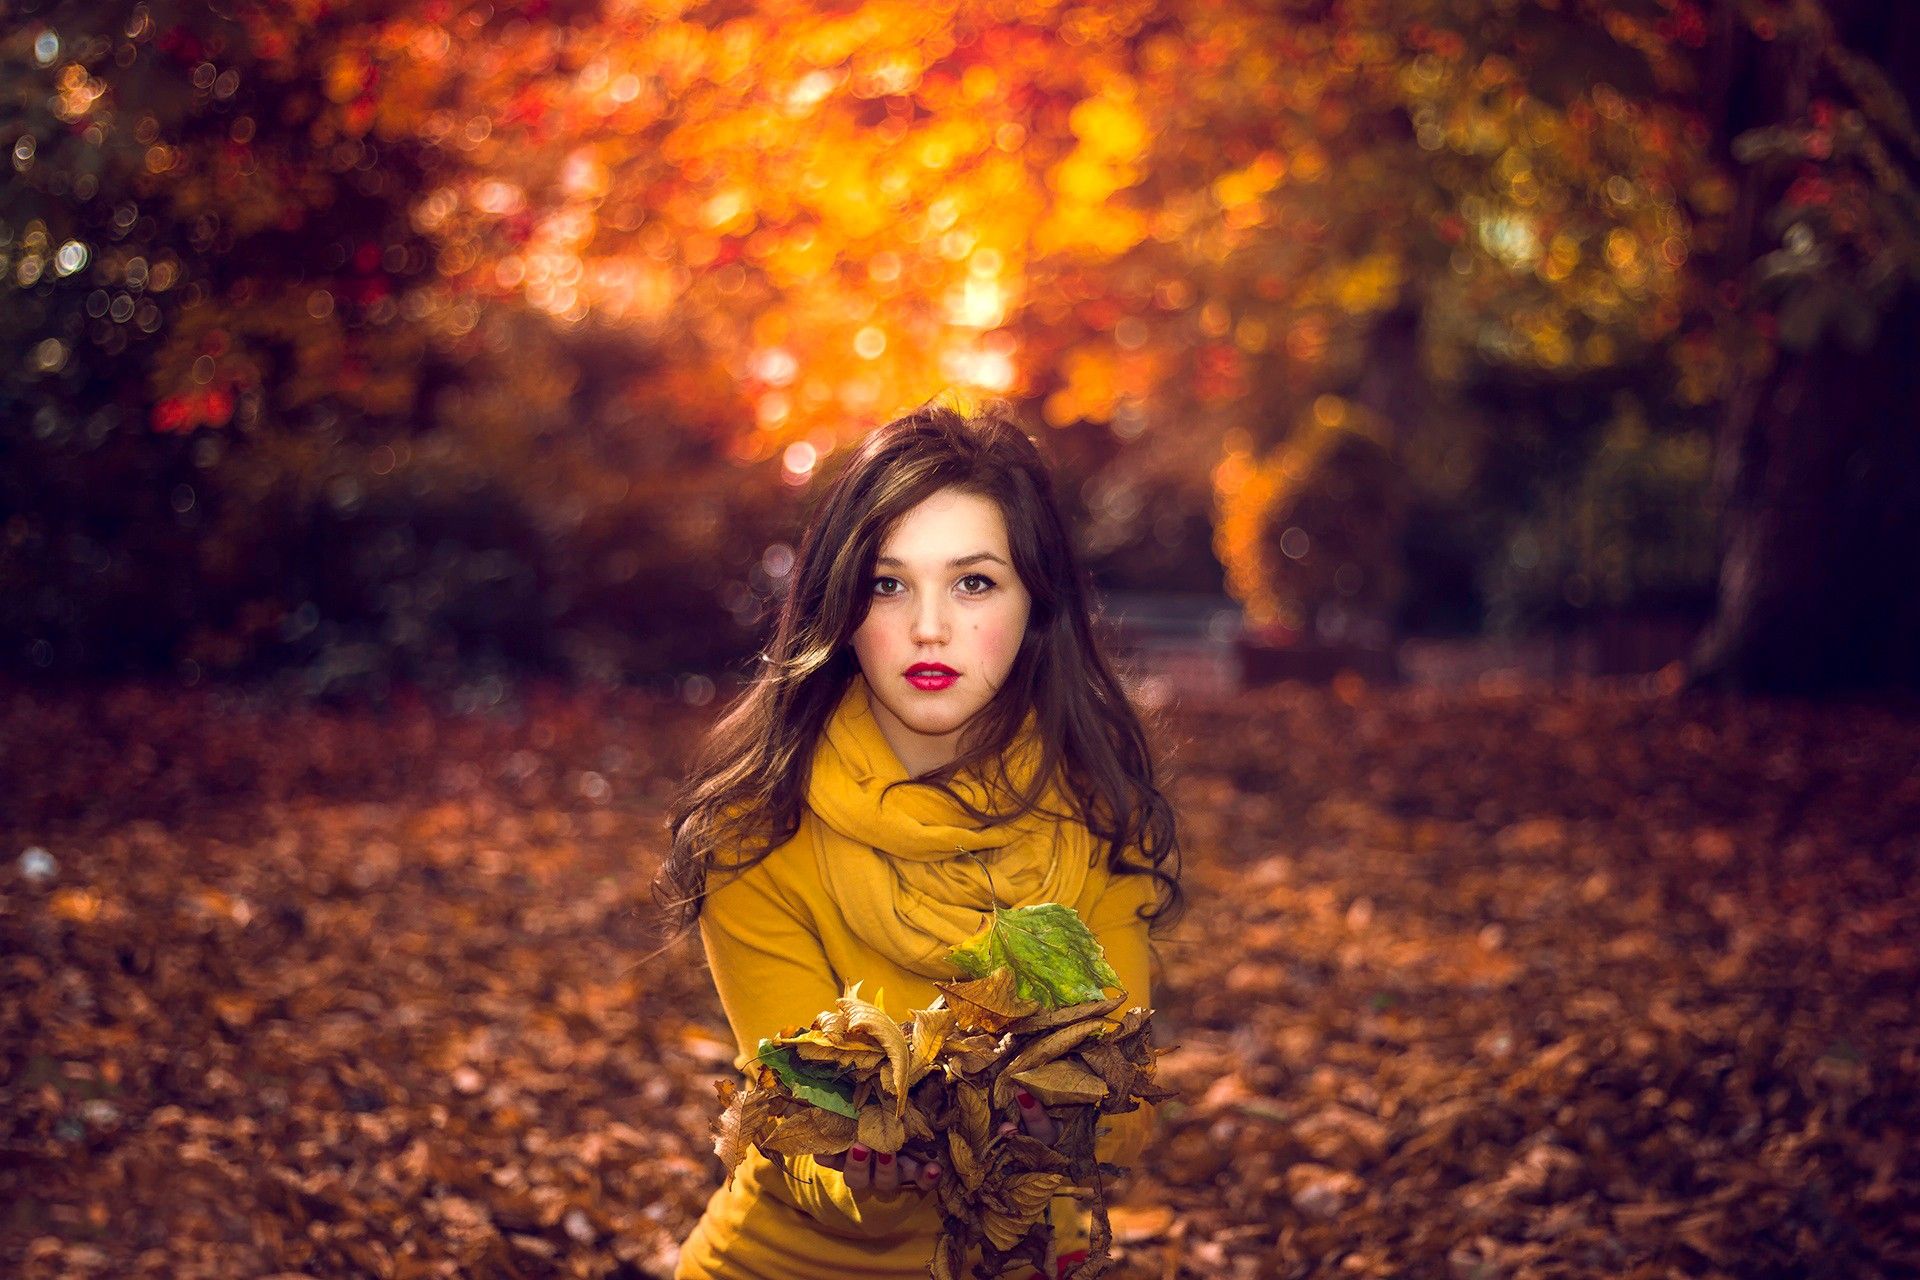 Wallpaper, sunlight, forest, fall, leaves, women outdoors, photography, morning, yellow dress, color, tree, autumn, leaf, flower, plant, beauty, season 1920x1280